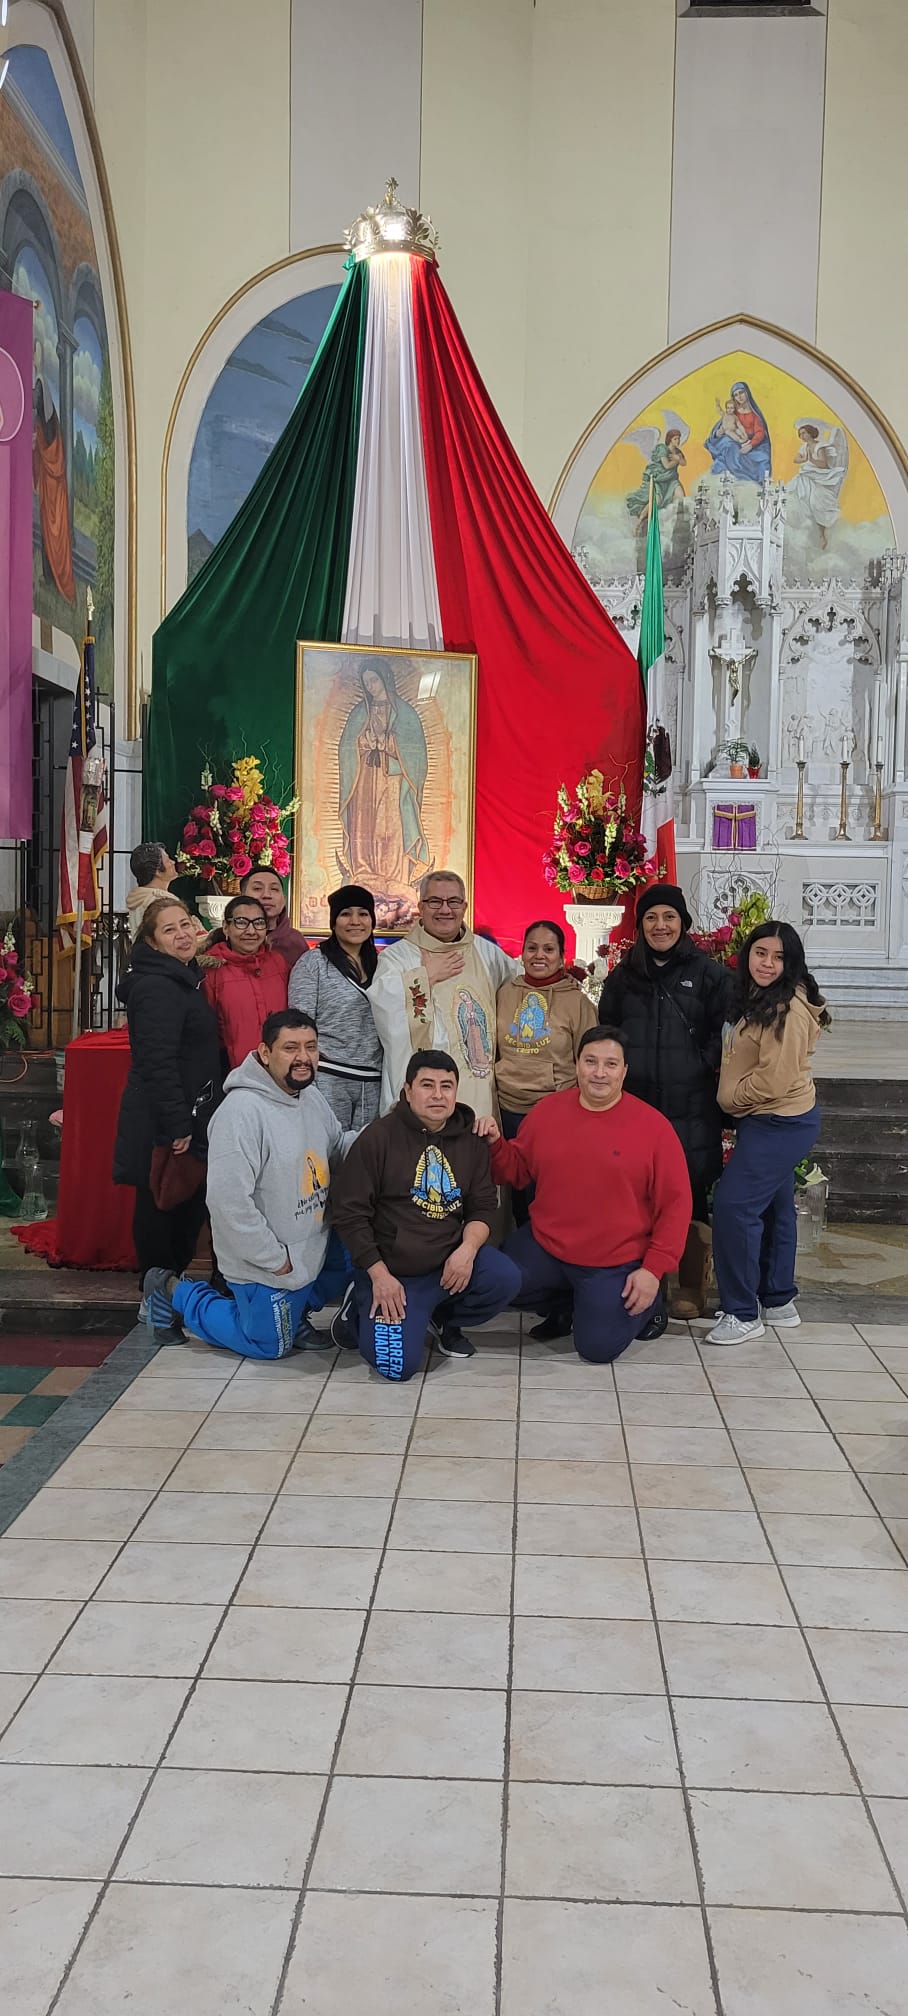 A group of people posing for a picture in front of an altar.